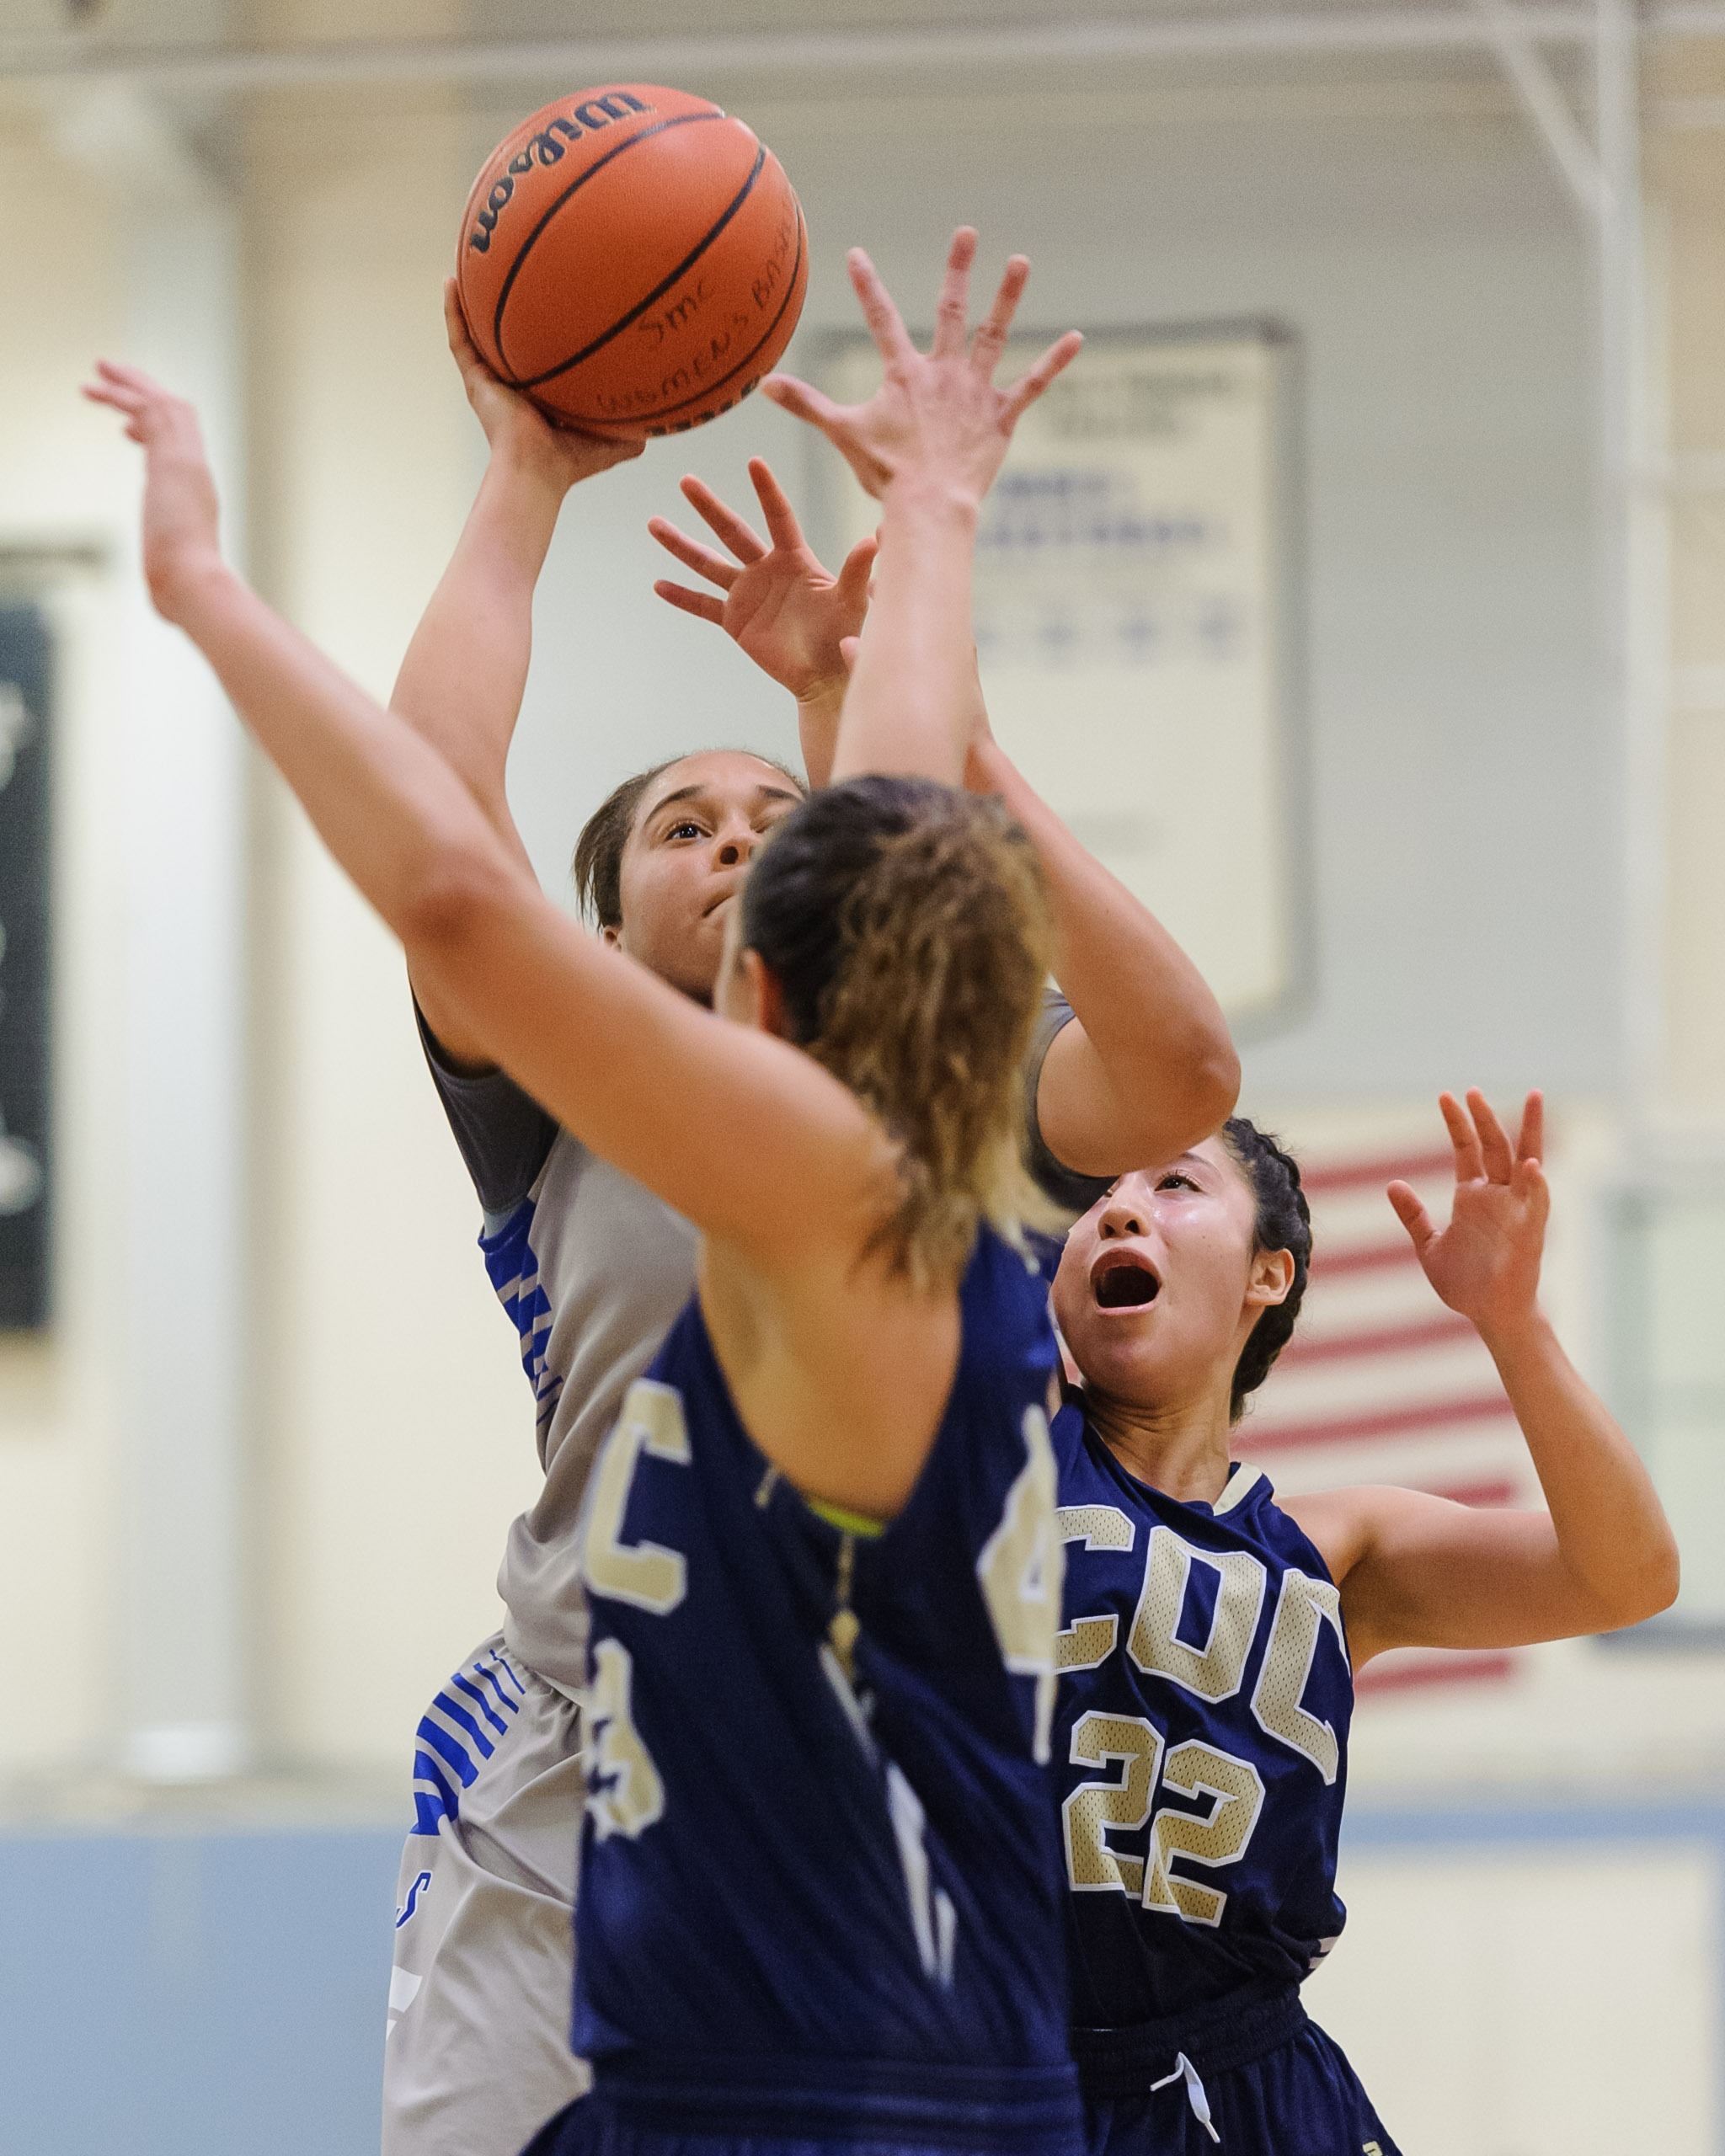  Rejinae Crandell (0,Left) of Santa Monica College shoots a shot in the lane while contested by the College of the Canyons defense. The Santa Monica College Corsairs lose the game 108-70 to the College of the Canyons Cougars. The game was held at the